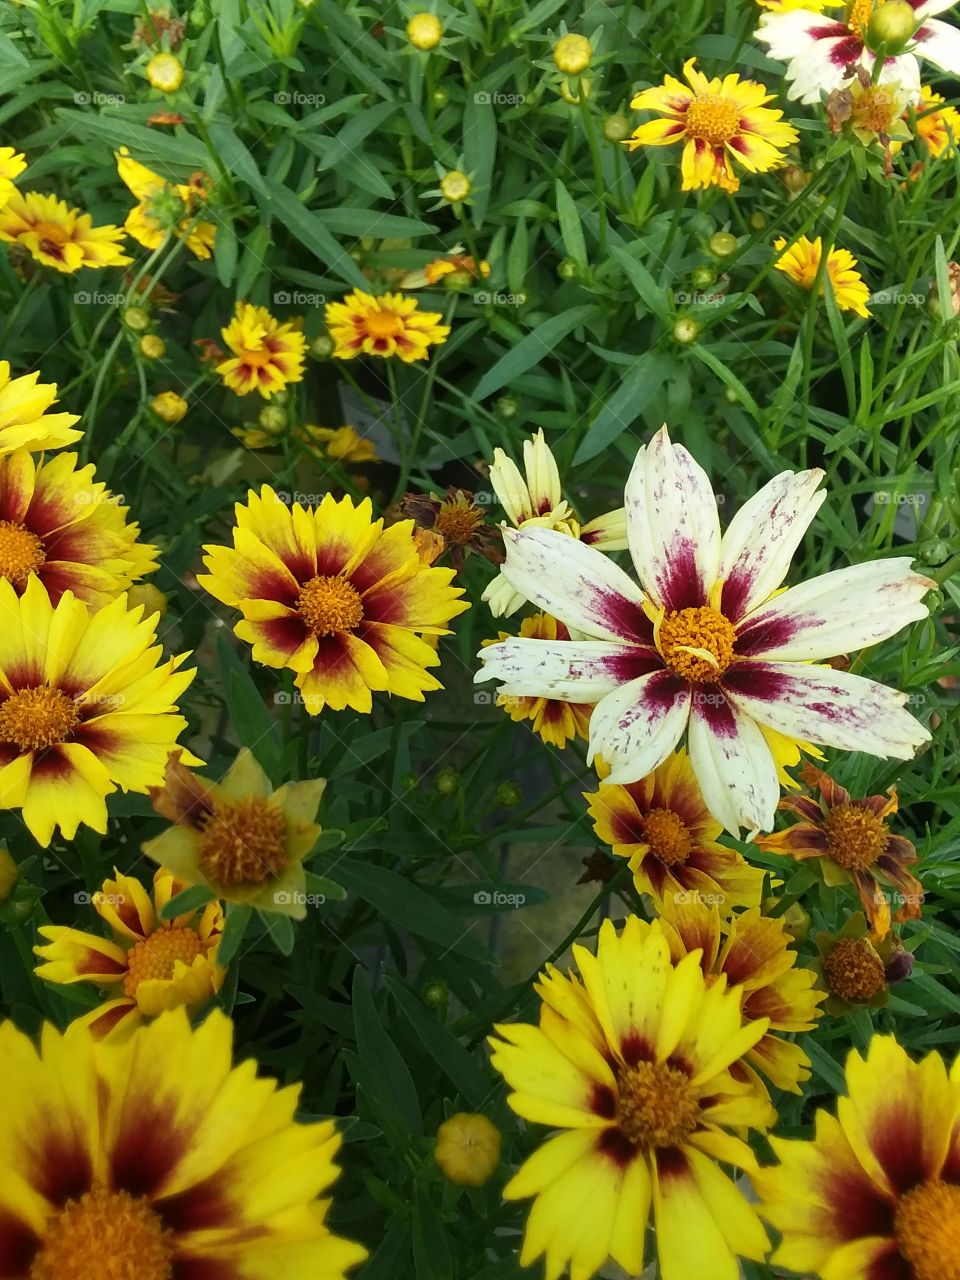 Speckled white, yellow, and red flowers.